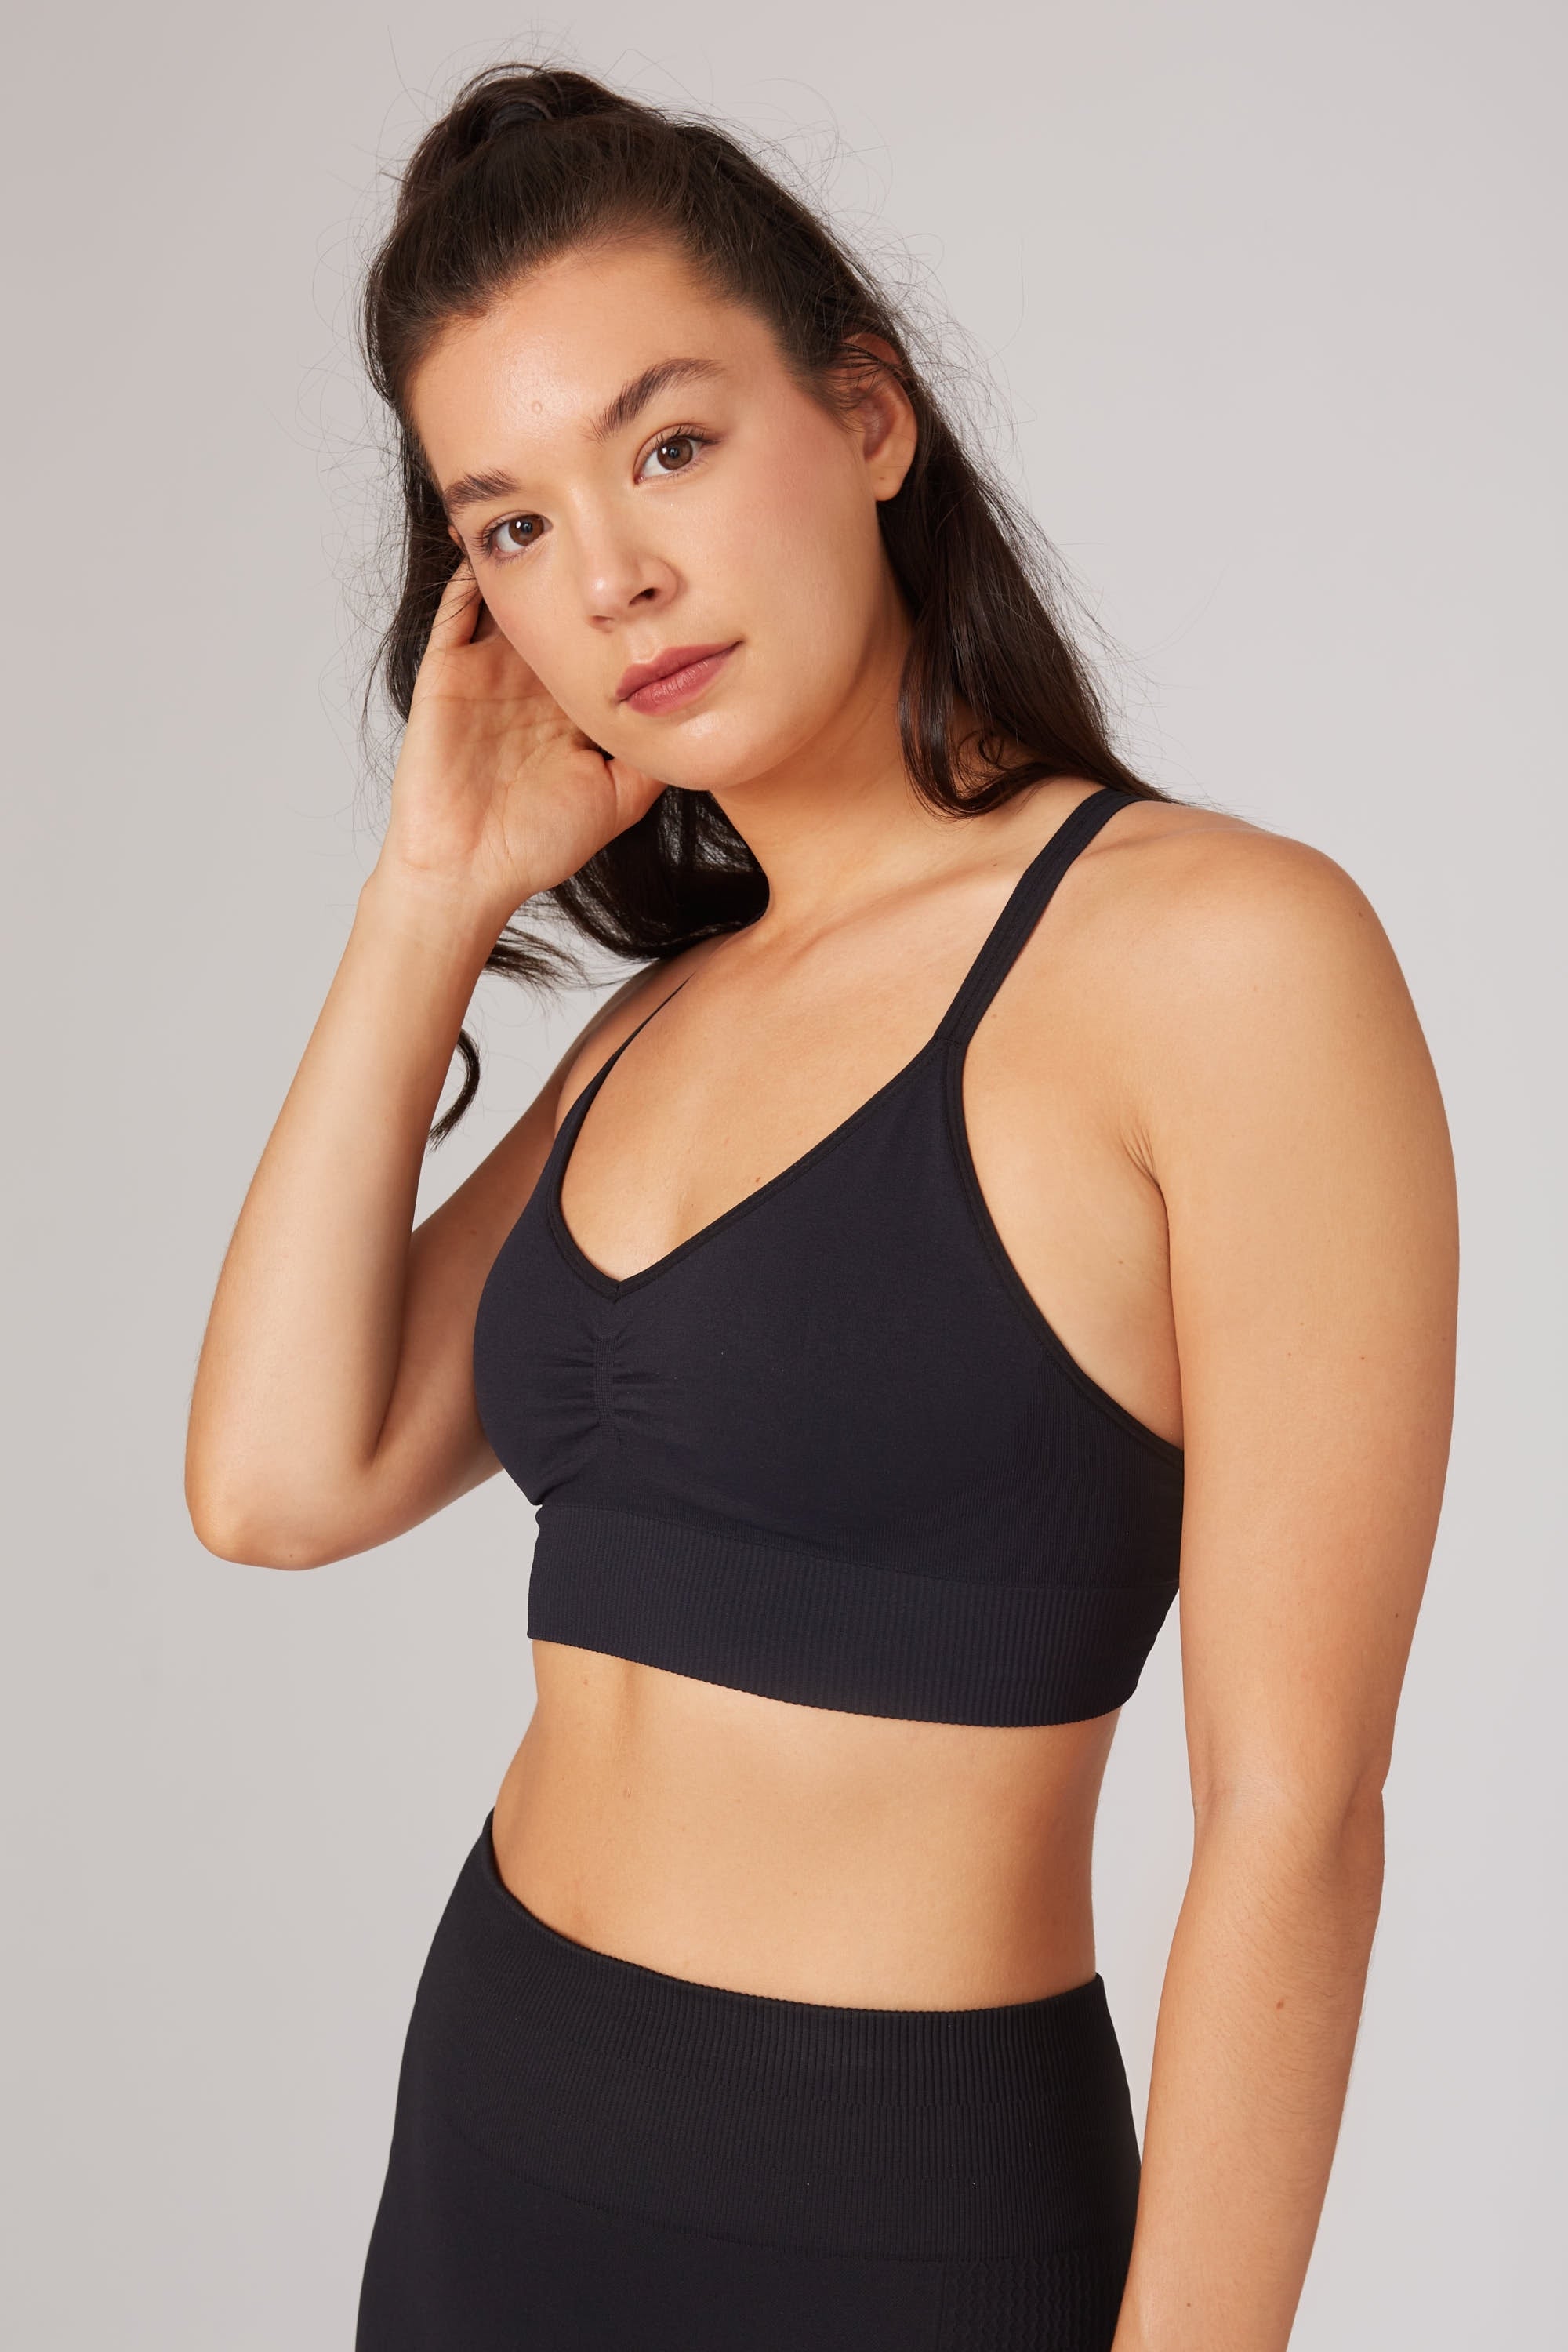 Model wearing black leggings and black supportive sports bra for sustainable activewear brand, Jilla.